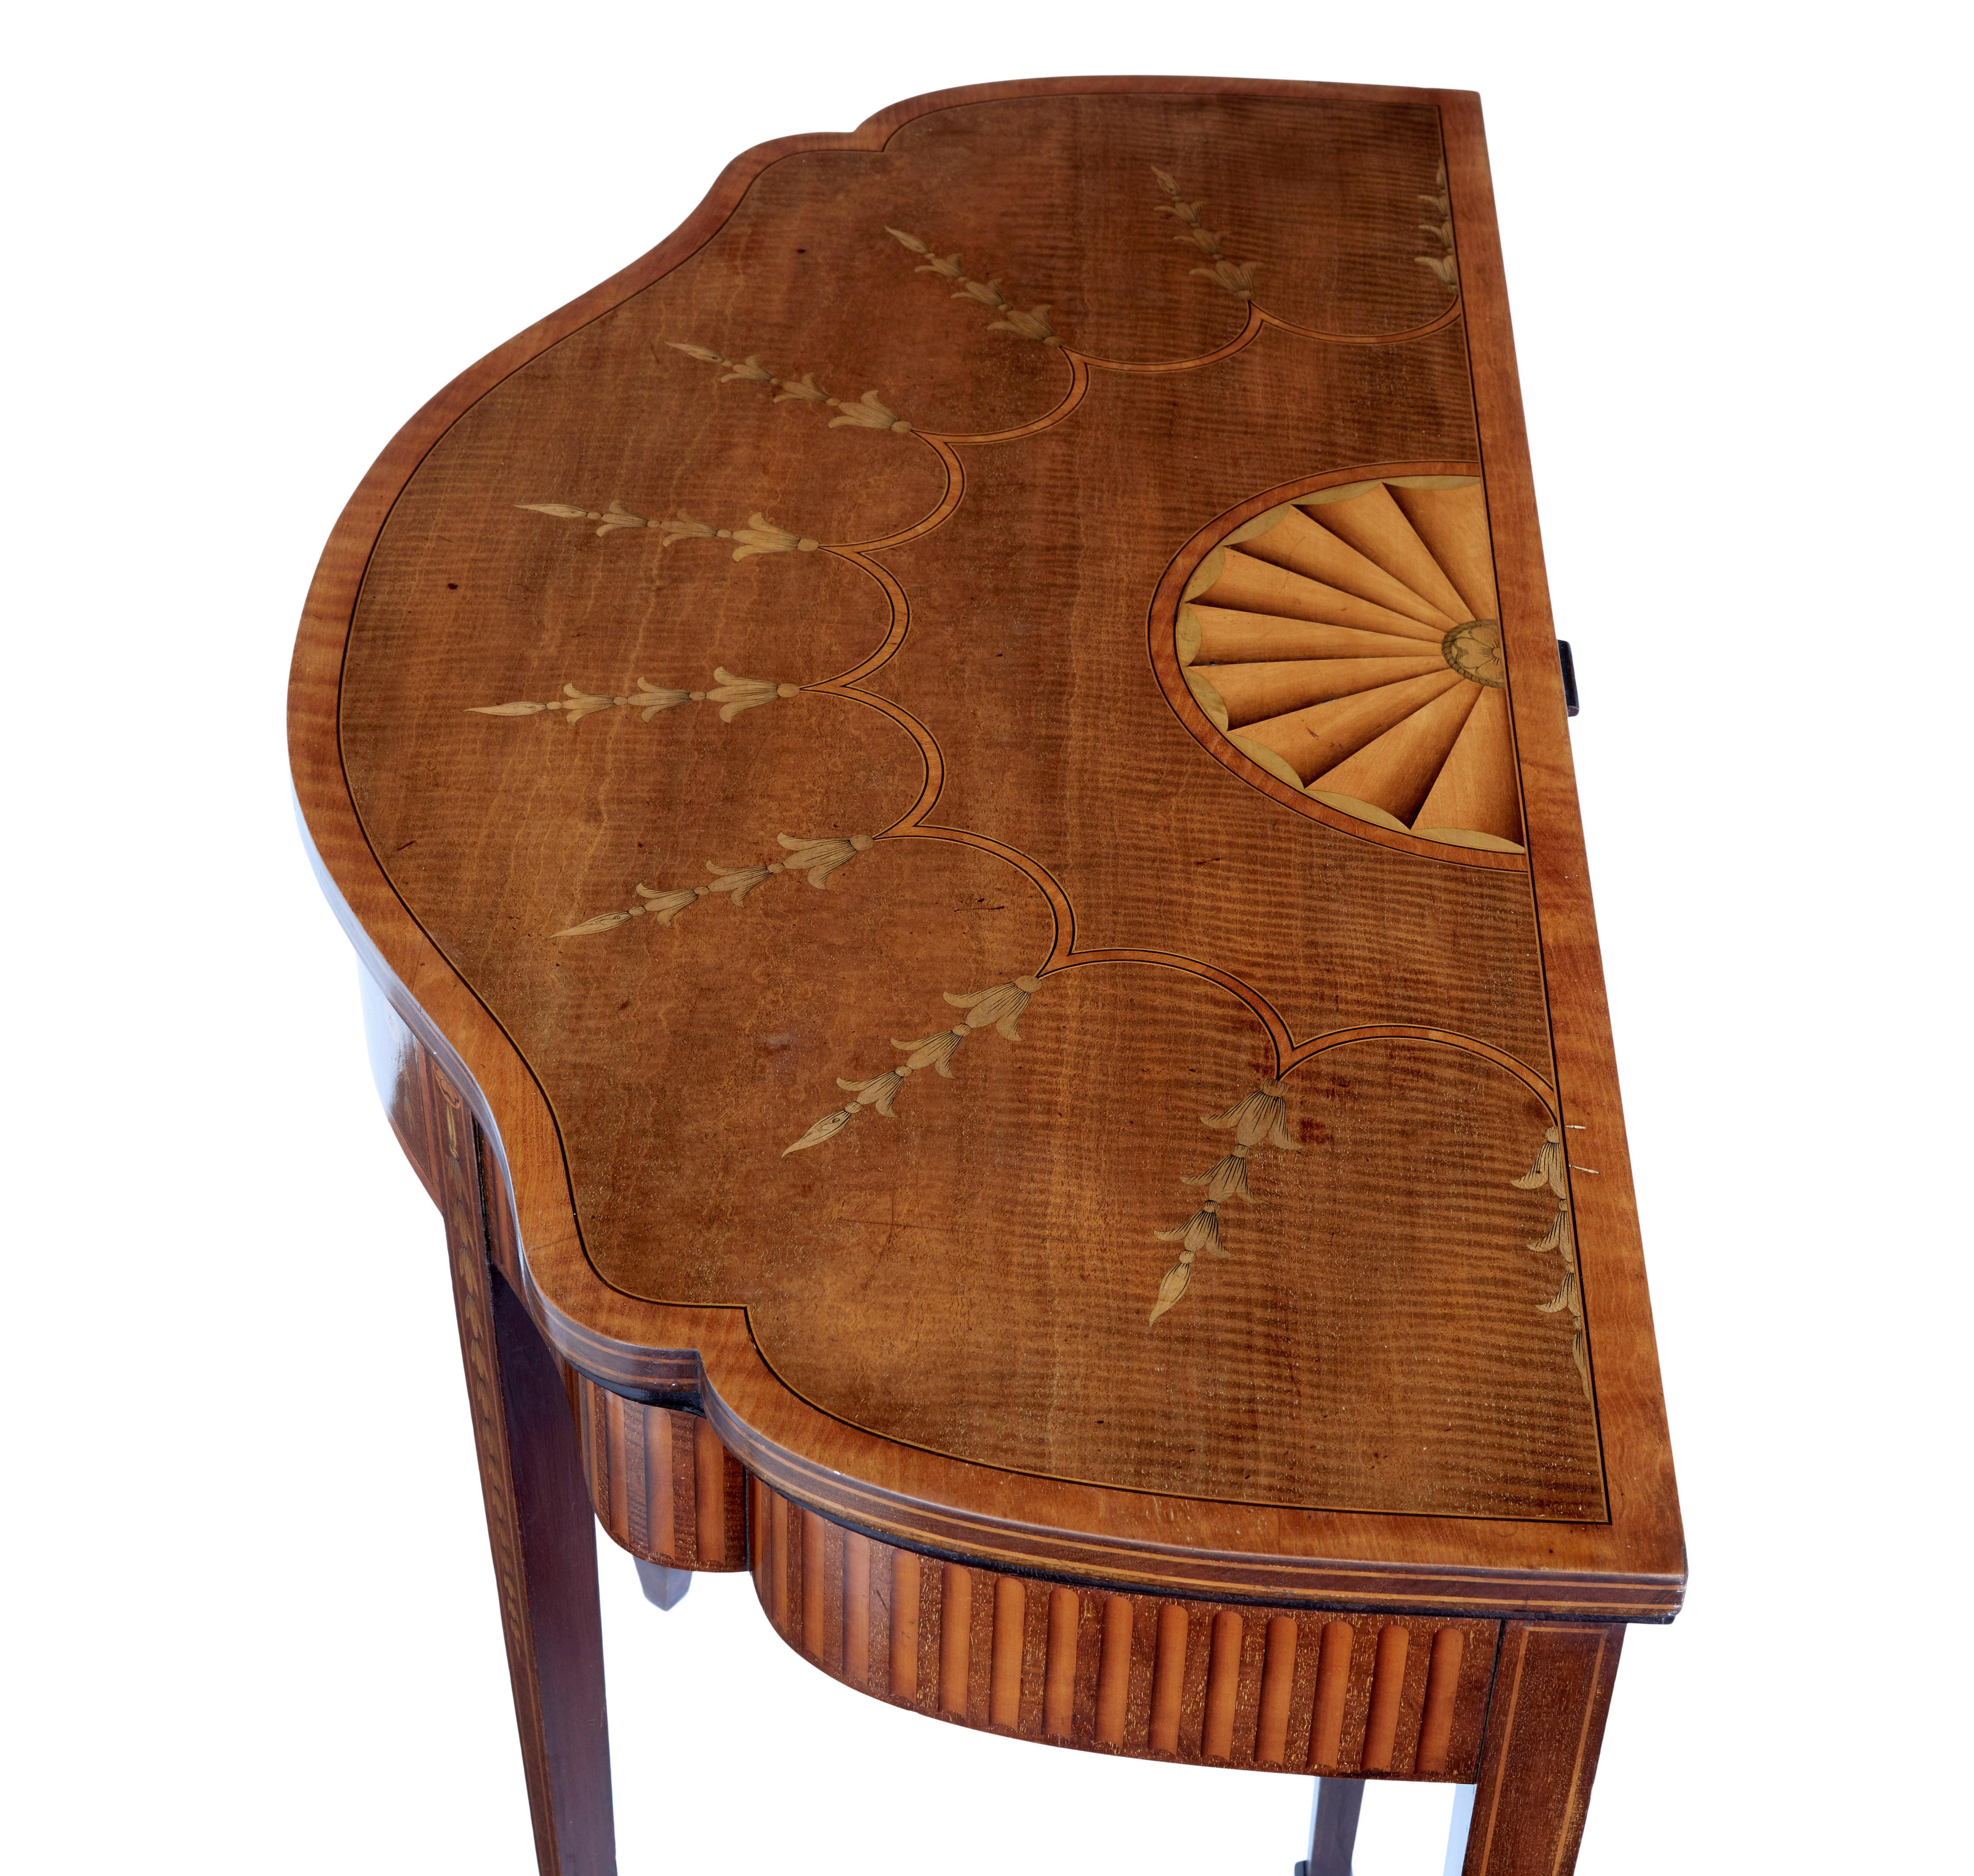 19th century Sheraton revival inlaid mahogany card table, circa 1880.

Shaped carved victorian carved card table in the sheraton revival style. Inlaid with a fan and florals in satinwood. Finished with stringing. Back leg pulls out to provide